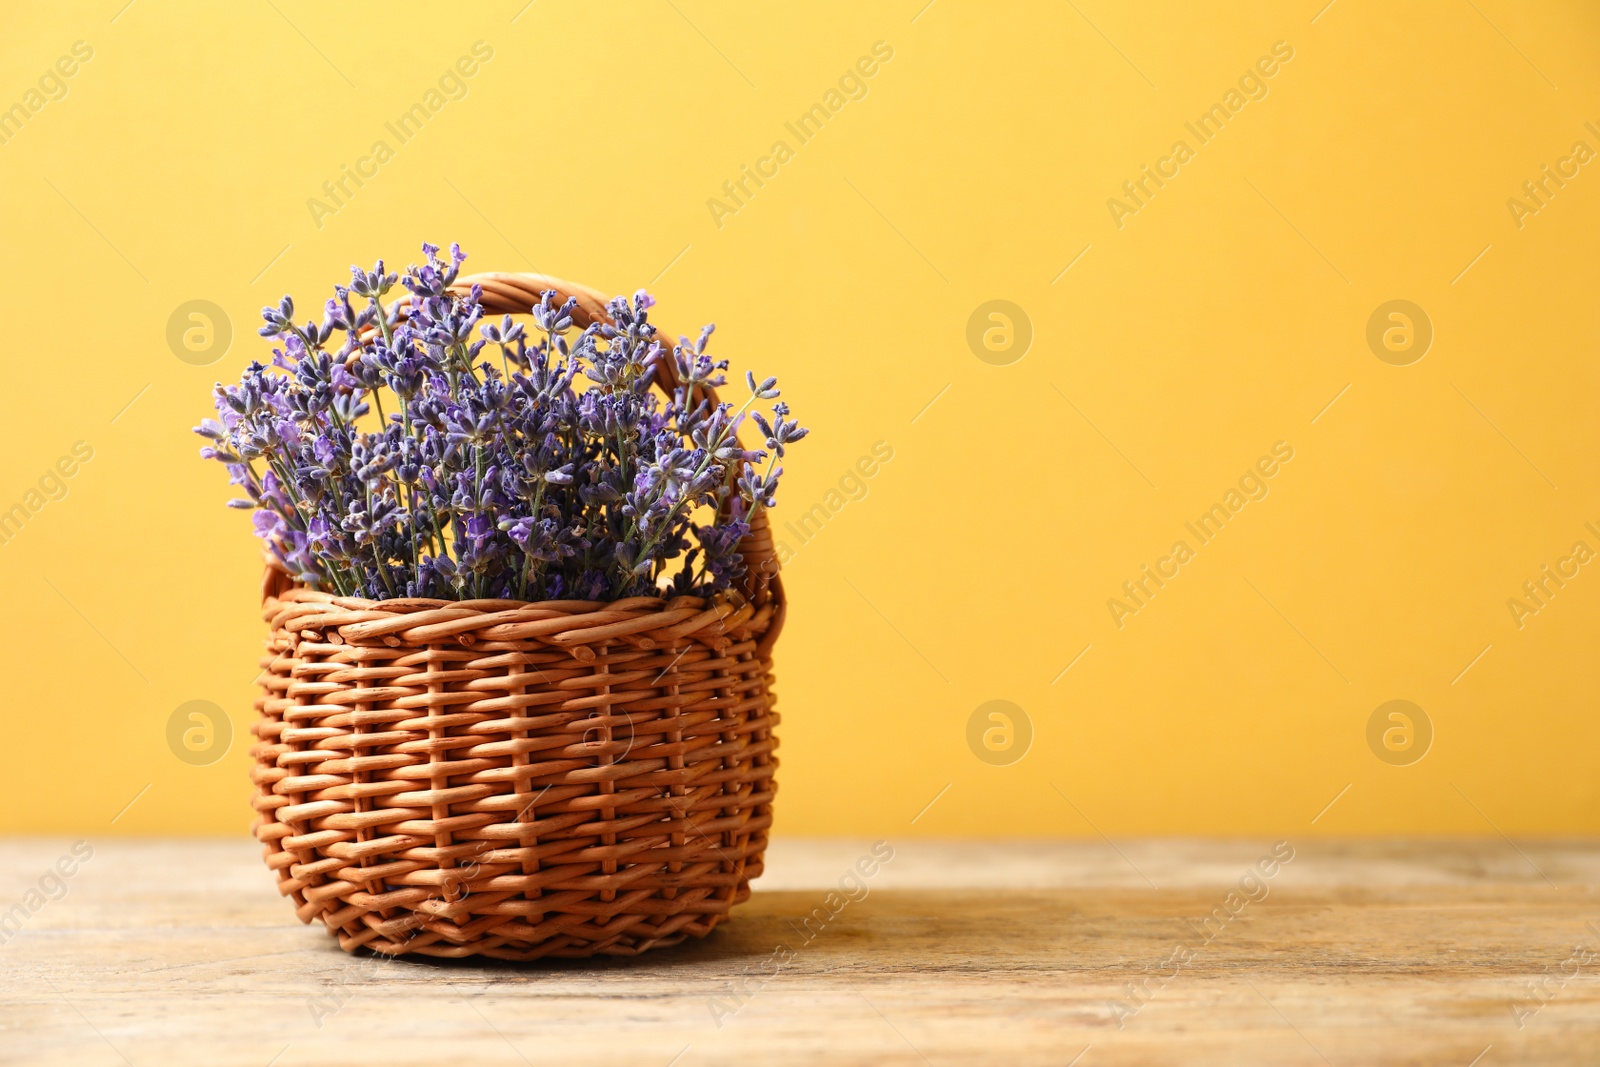 Photo of Basket with fresh lavender flowers on wooden table against yellow background. Space for text